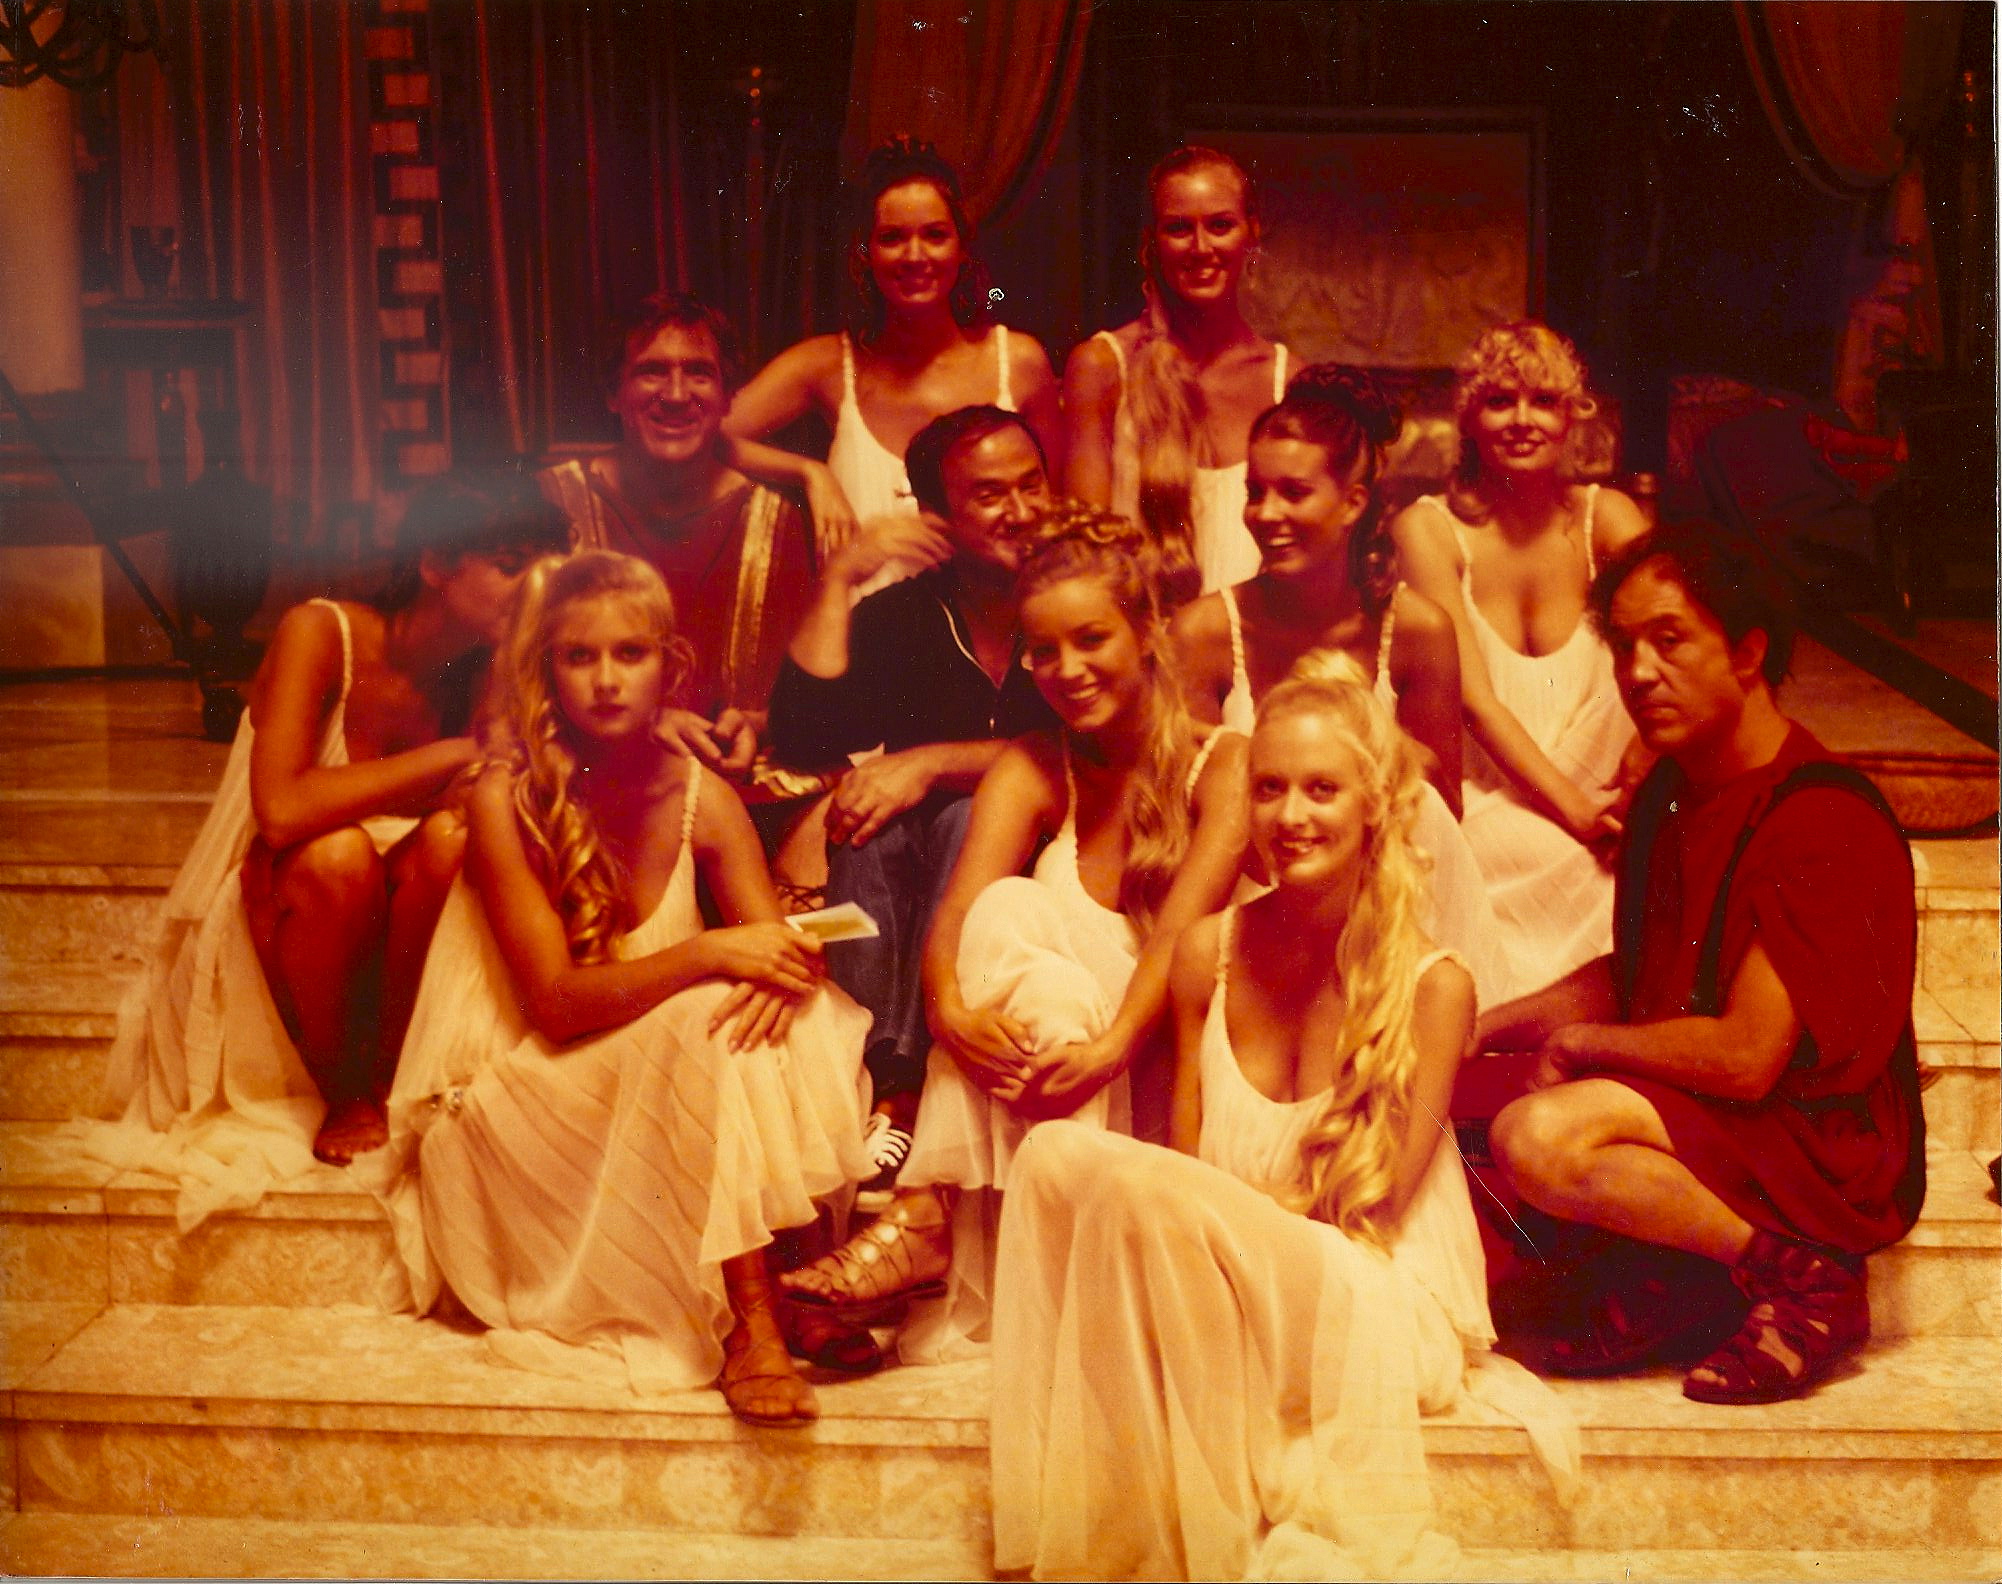 Mel Brook's History of the World Part 1 Vestal Virgins and cast members. Lou Mulford back row with Shecky Greene